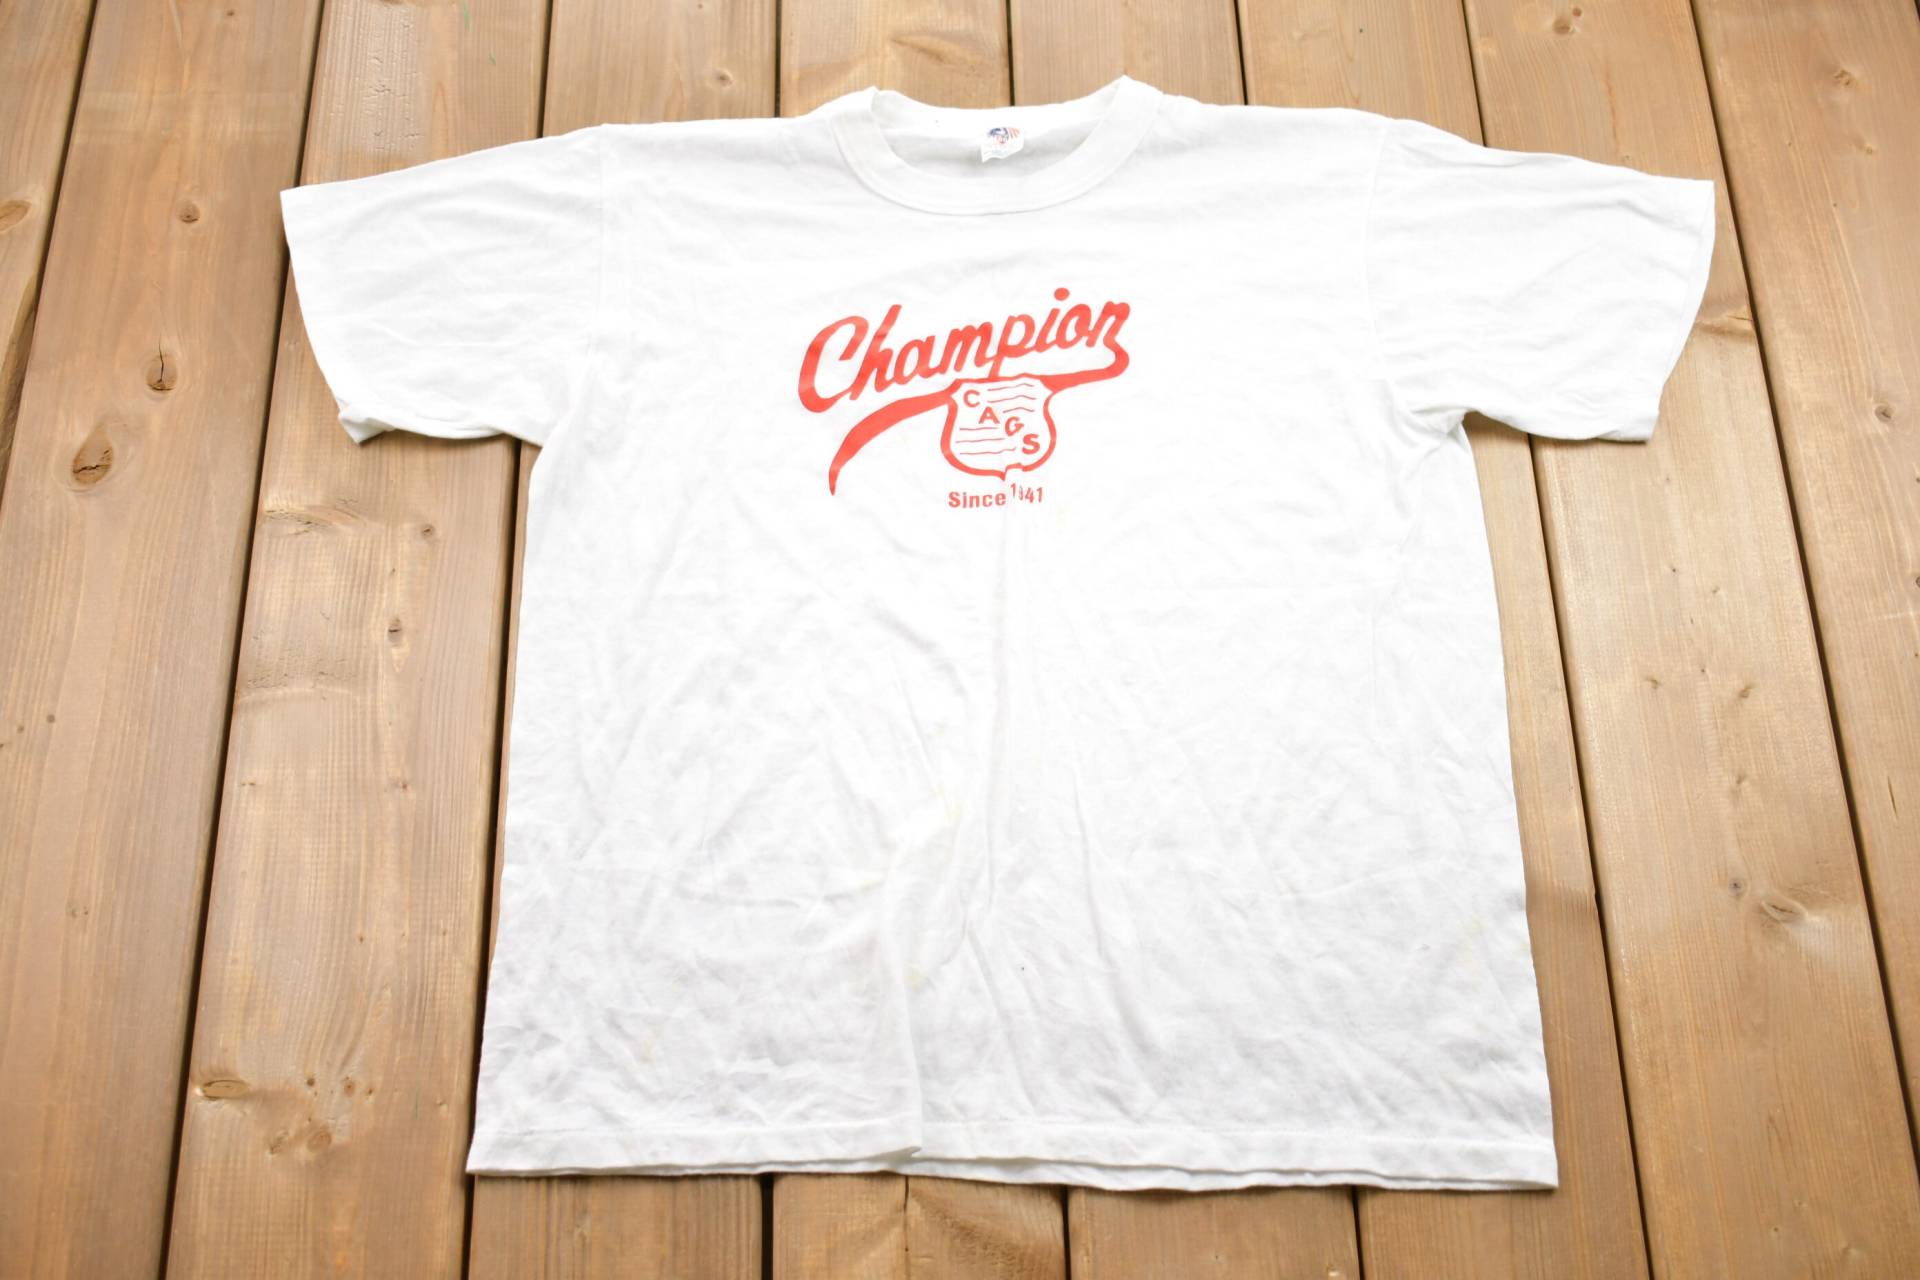 Vintage 1980S Champion Graphic T-Shirt/80S Streetwear Retro Style Single Stitch Made in Usa Cags von Lostboysvintage